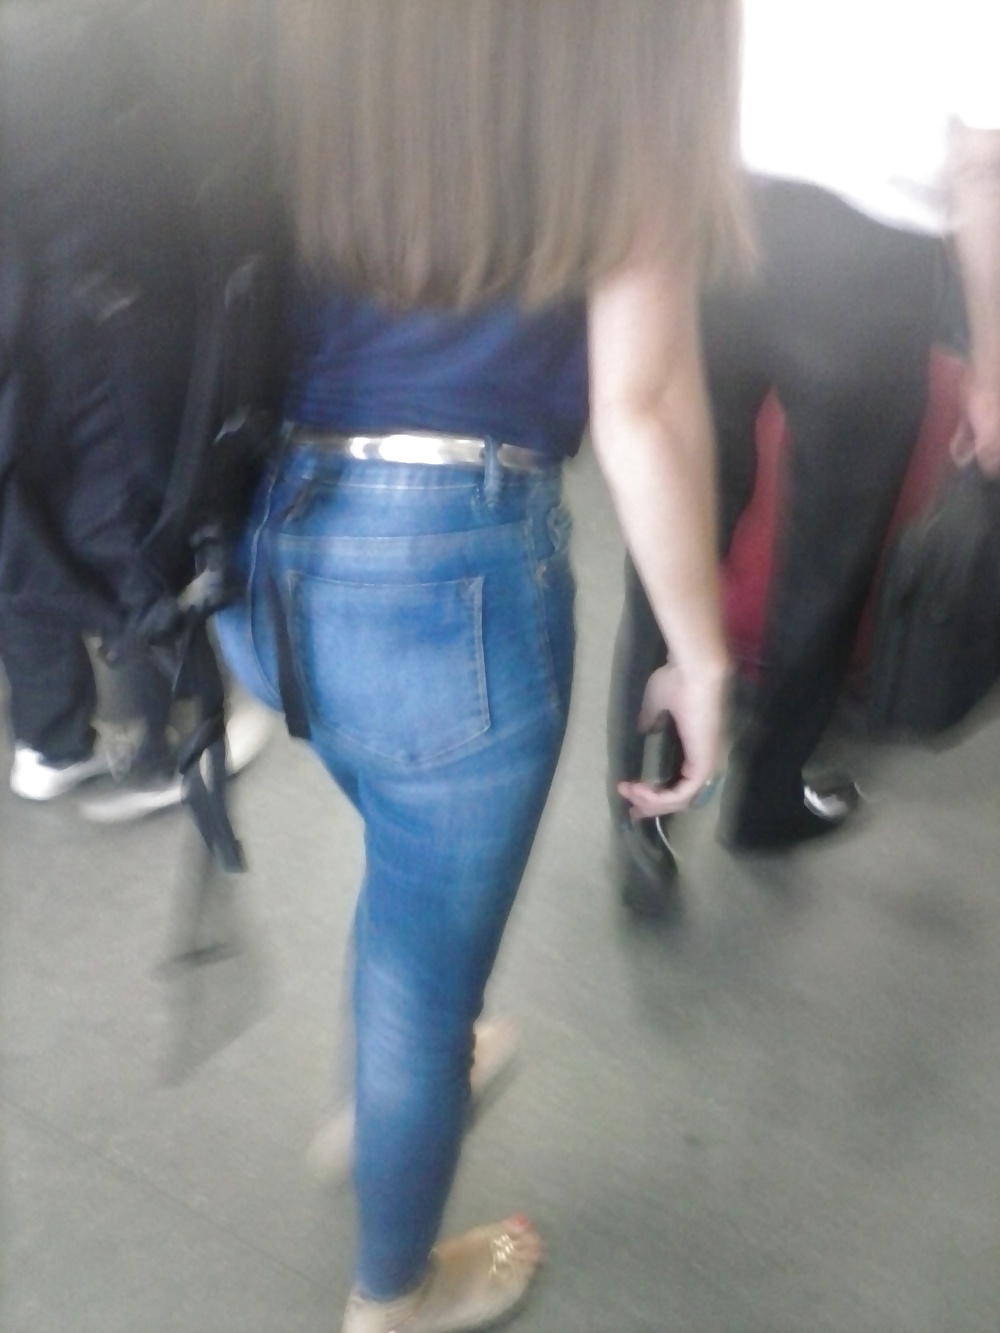 Hot Older Milf Tight Jeans Candid #28708675